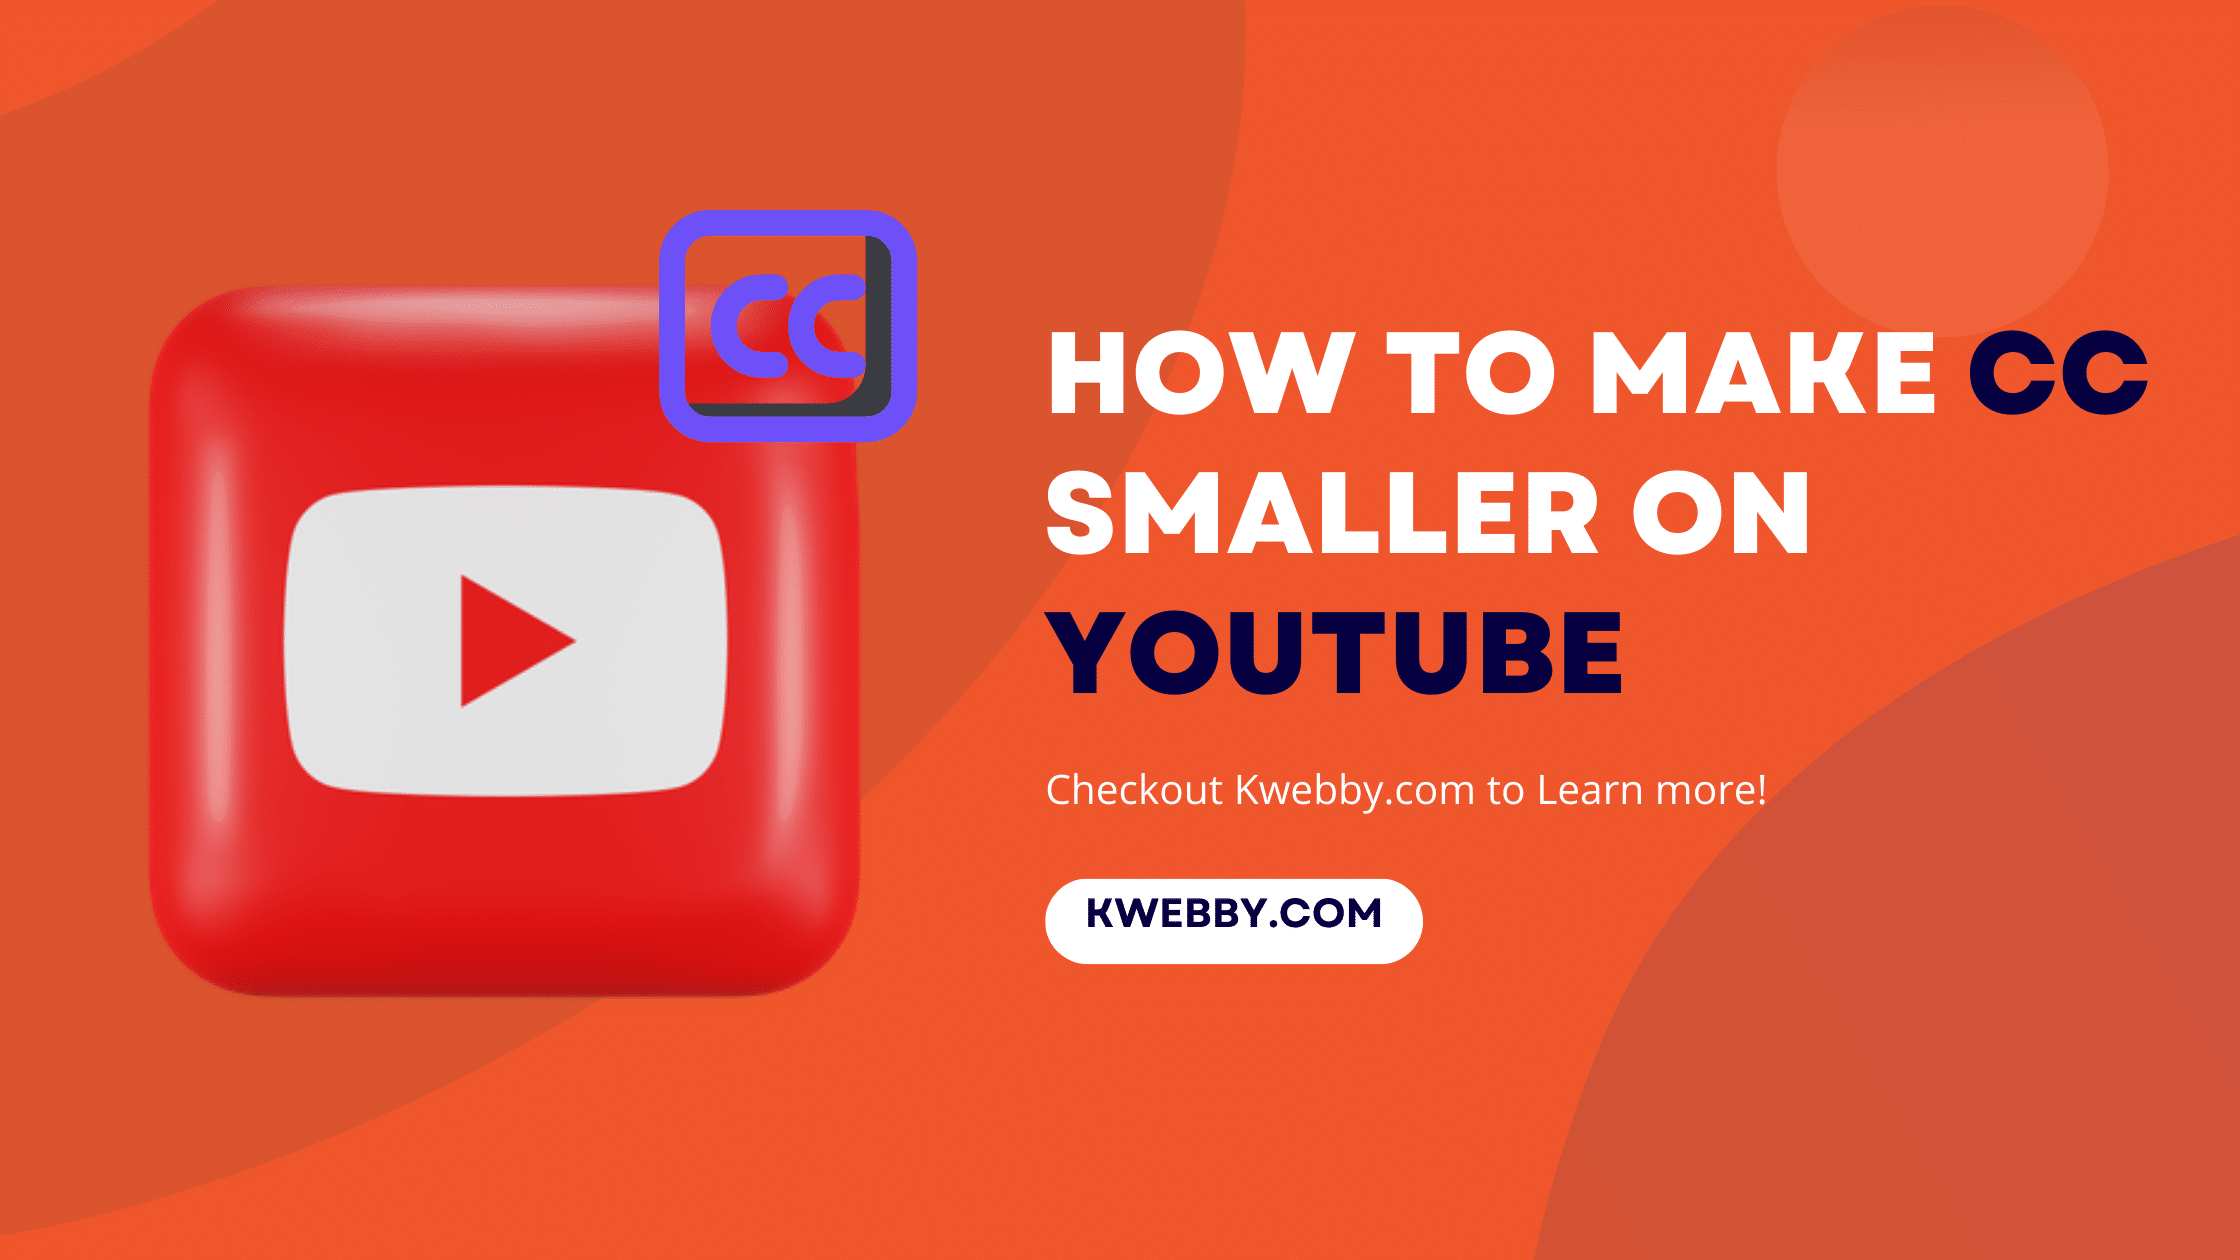 How to Make CC Smaller on YouTube